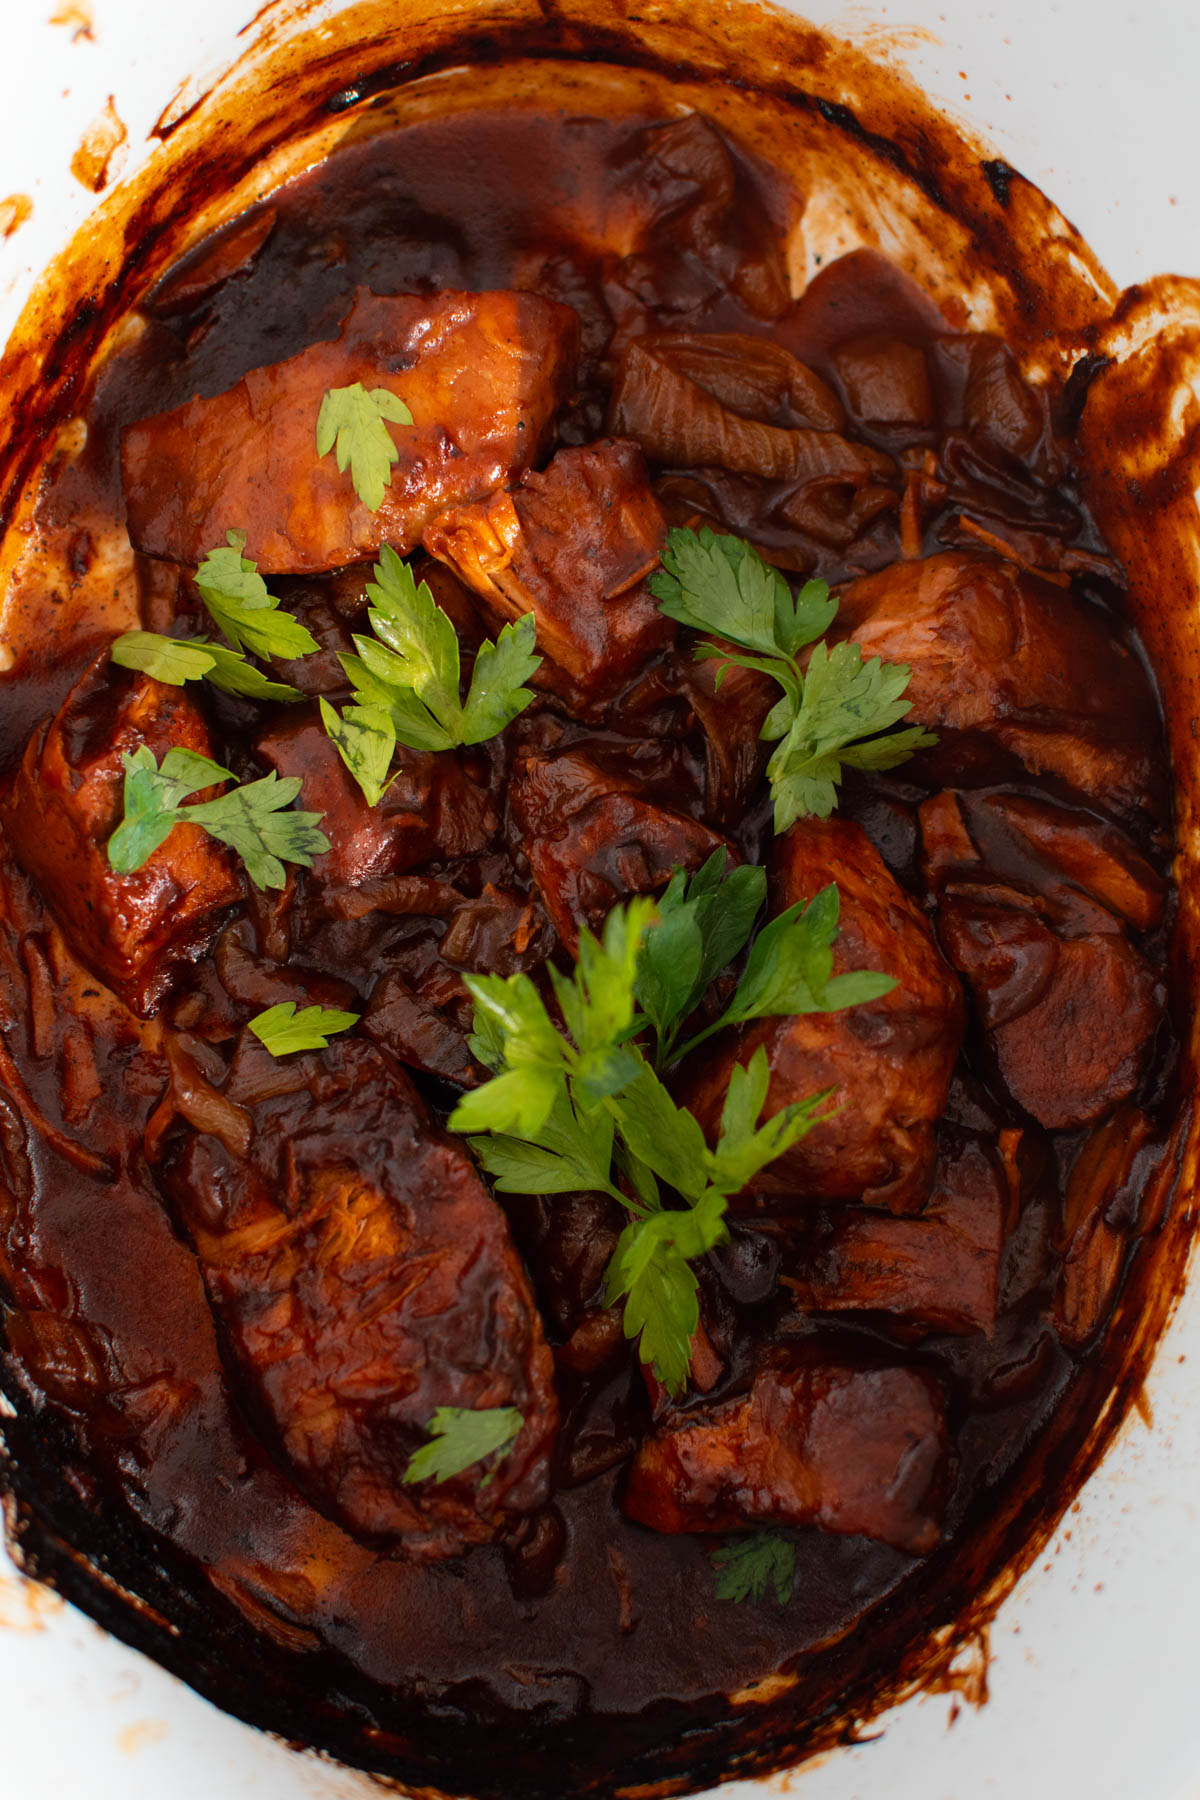 Crock Pot ribs with barbeque sauce, onion slices, and parsley leaves.